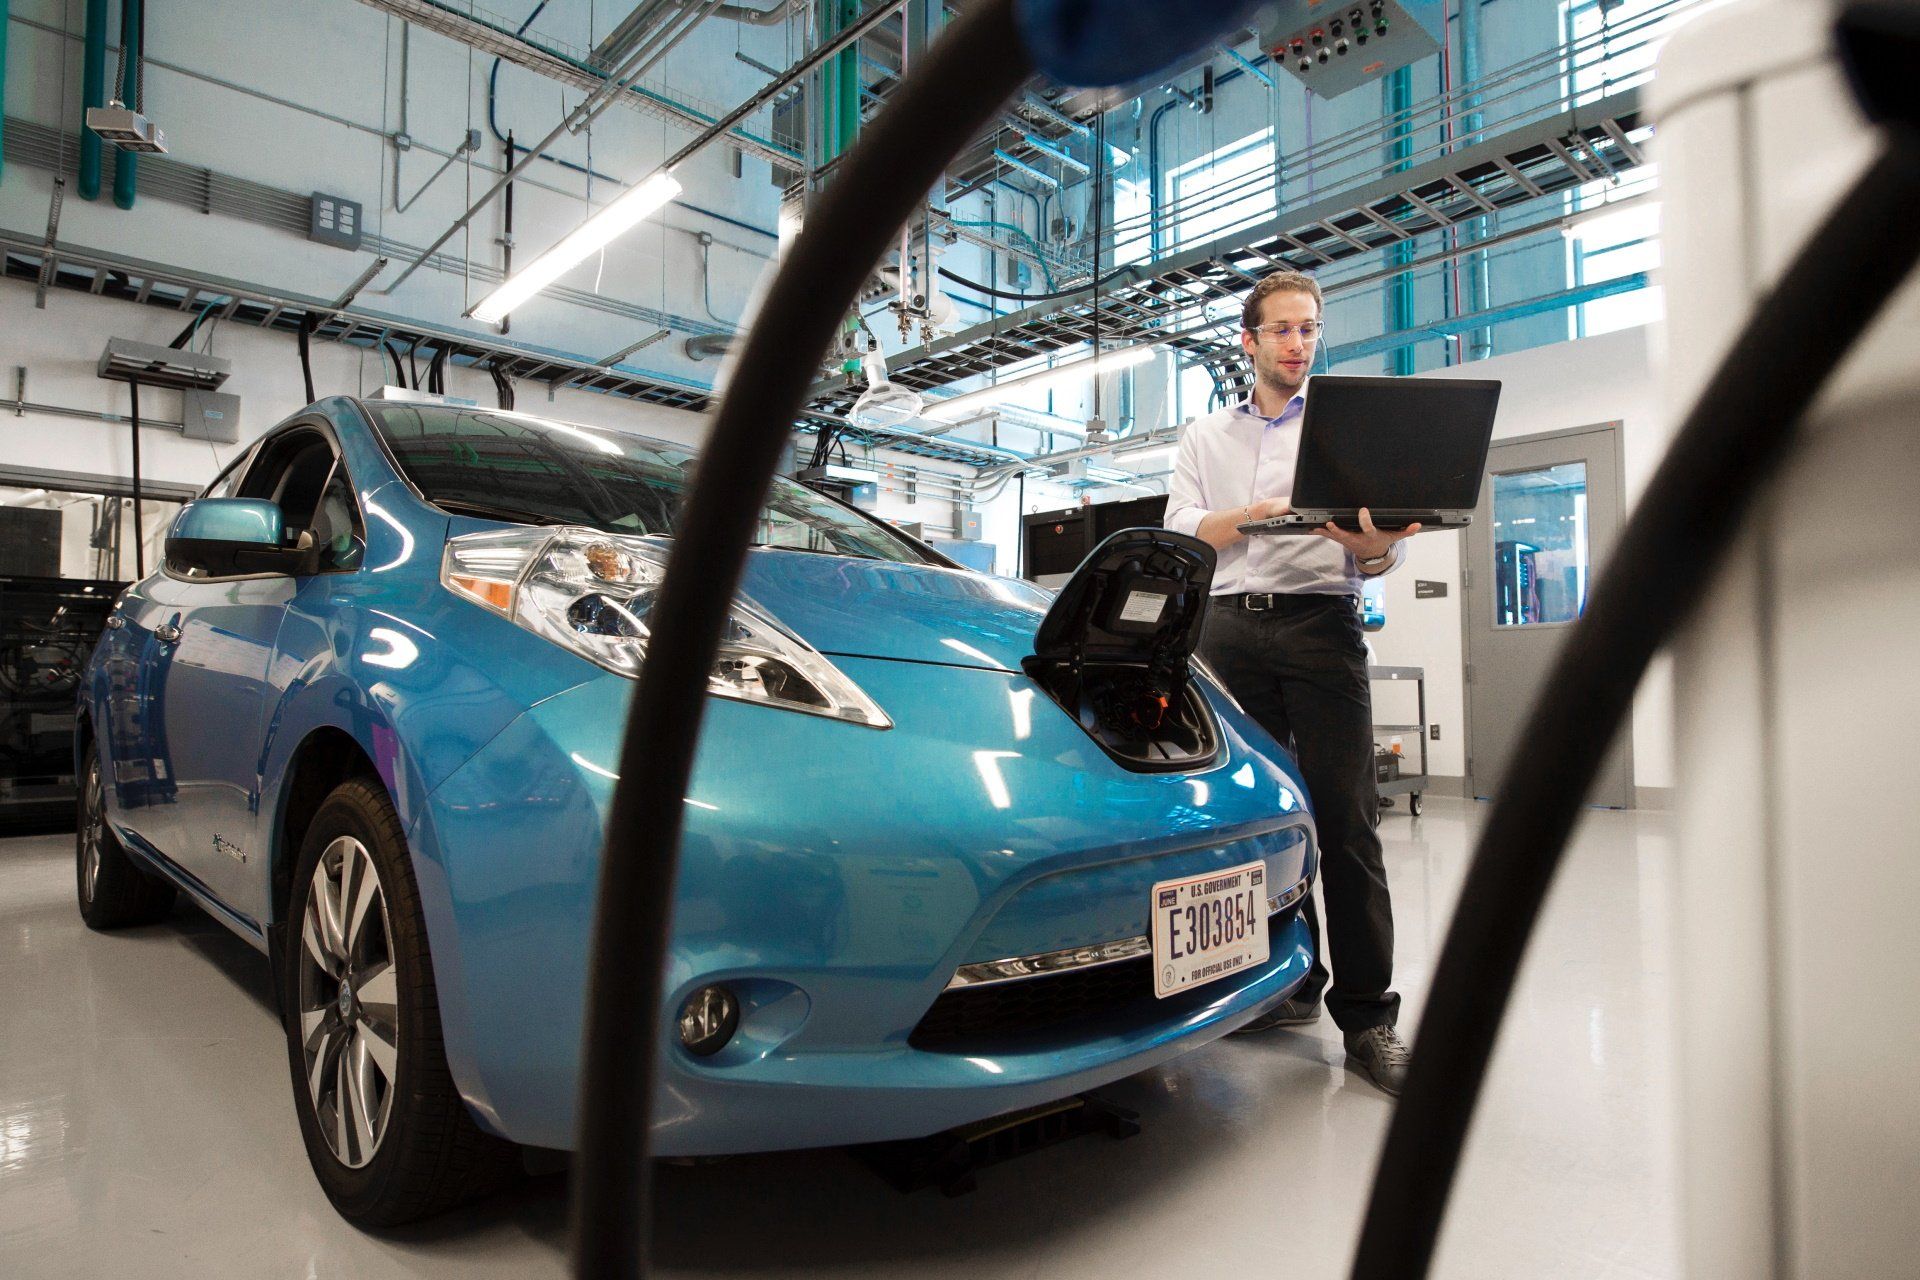 A man is standing next to a blue electric car in a garage.